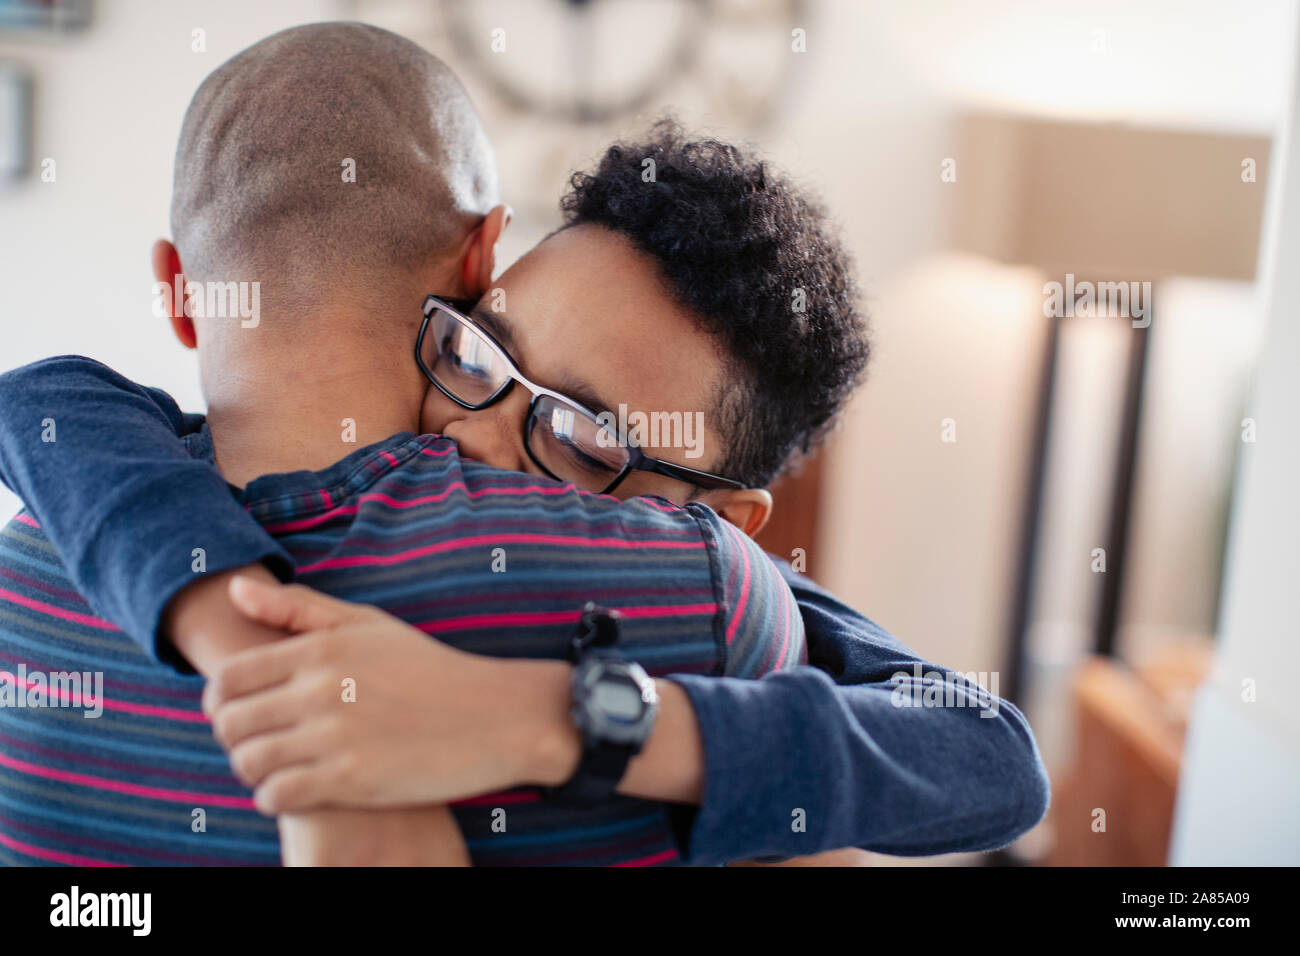 Affectionate son hugging father Stock Photo